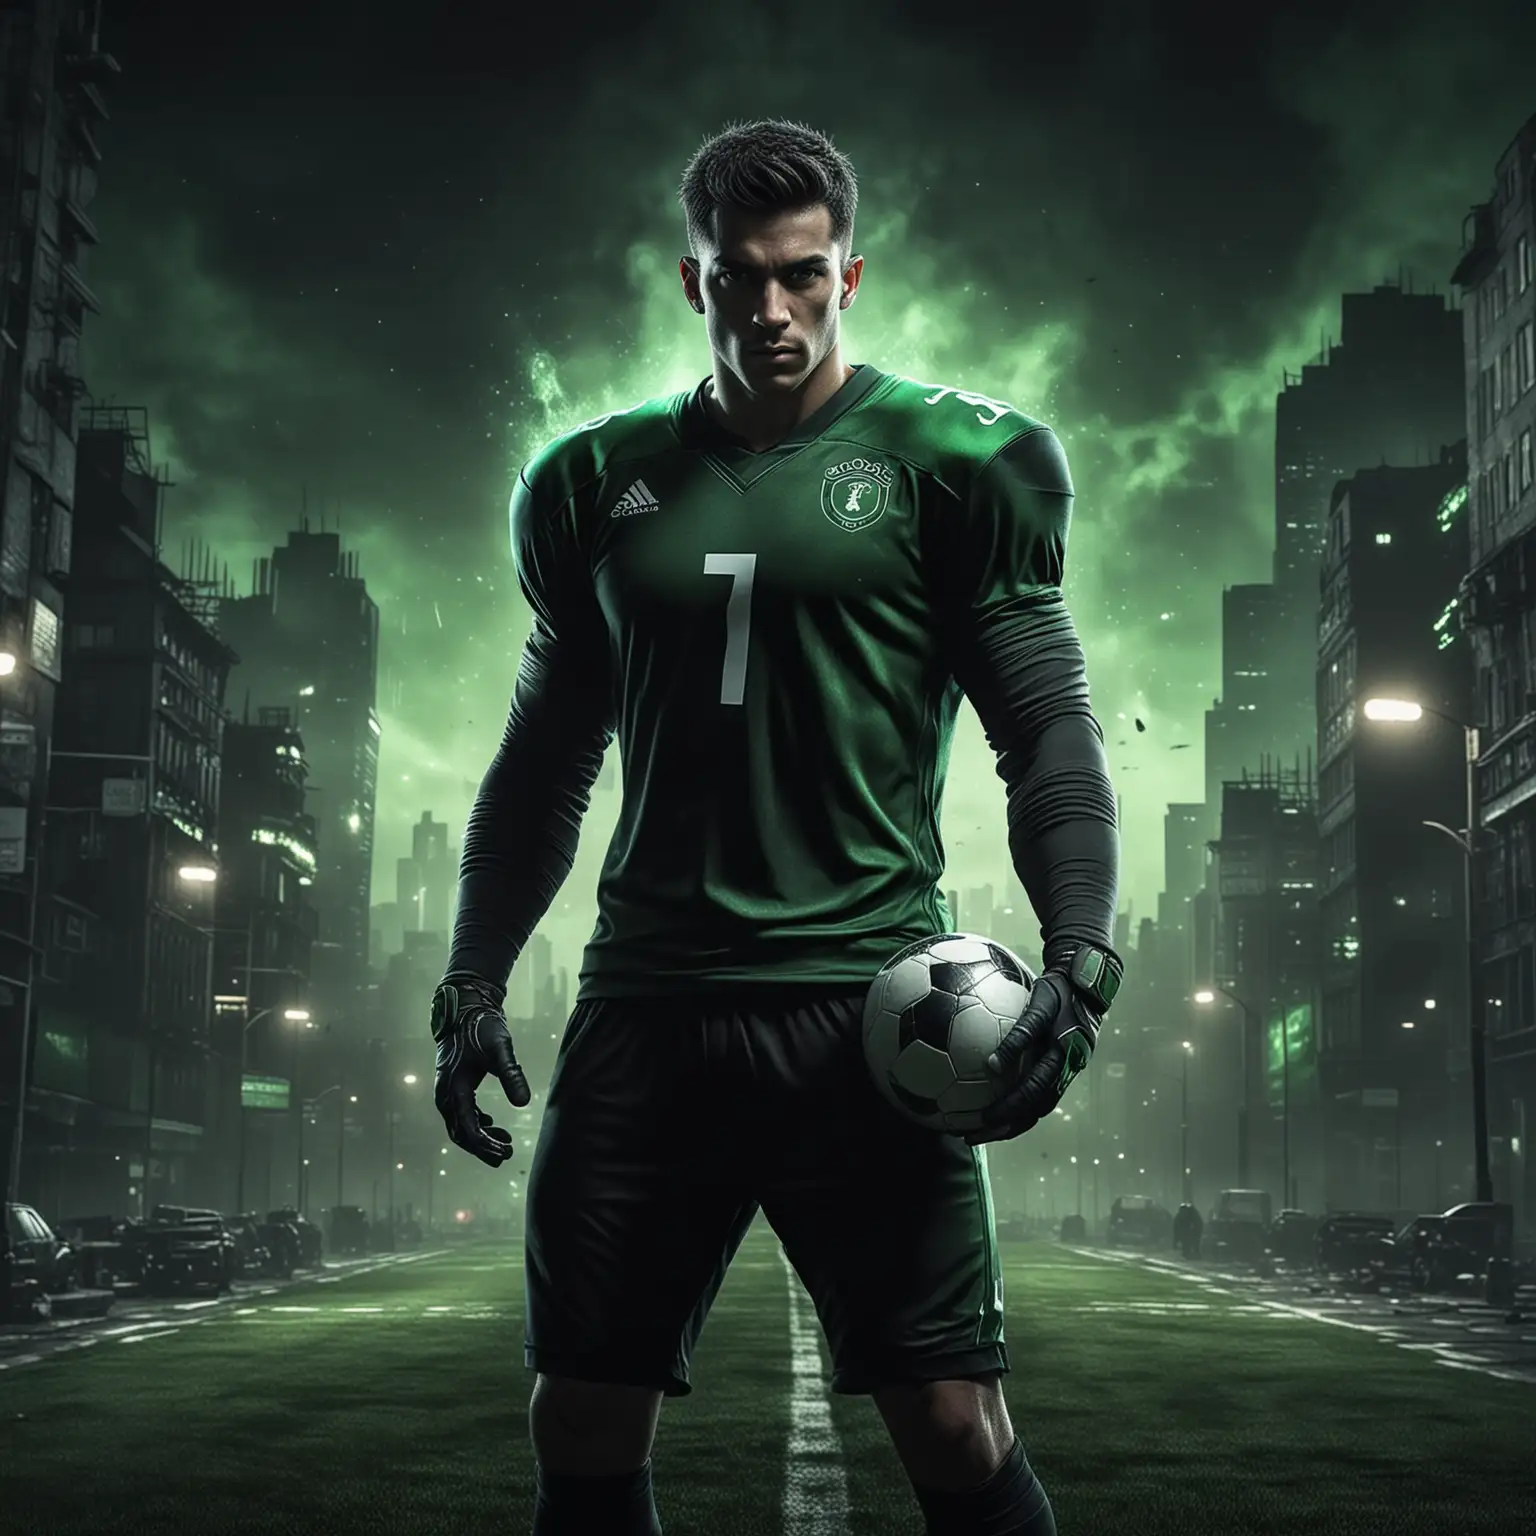 Dark City Football Player in Black and Green Attire with Realistic Special Effects